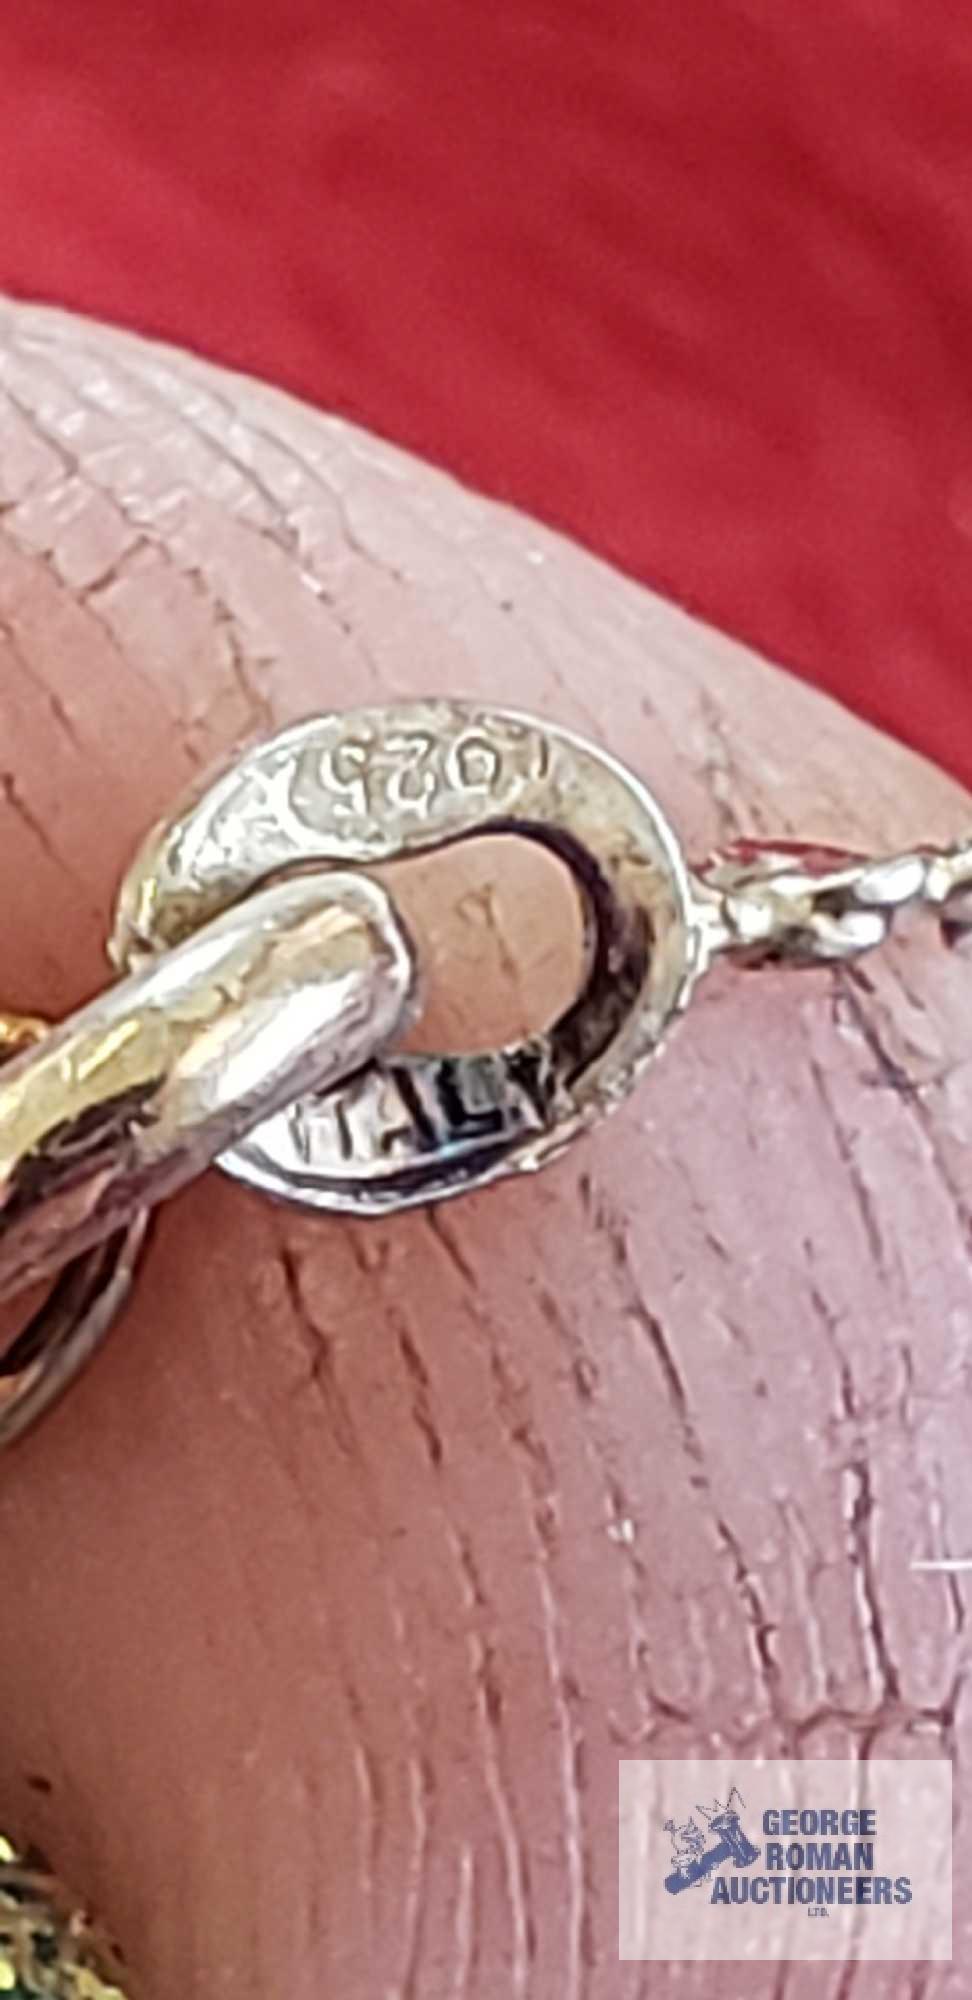 Silver colored twist bracelet, marked 925, approximate total weight is 1.47 G